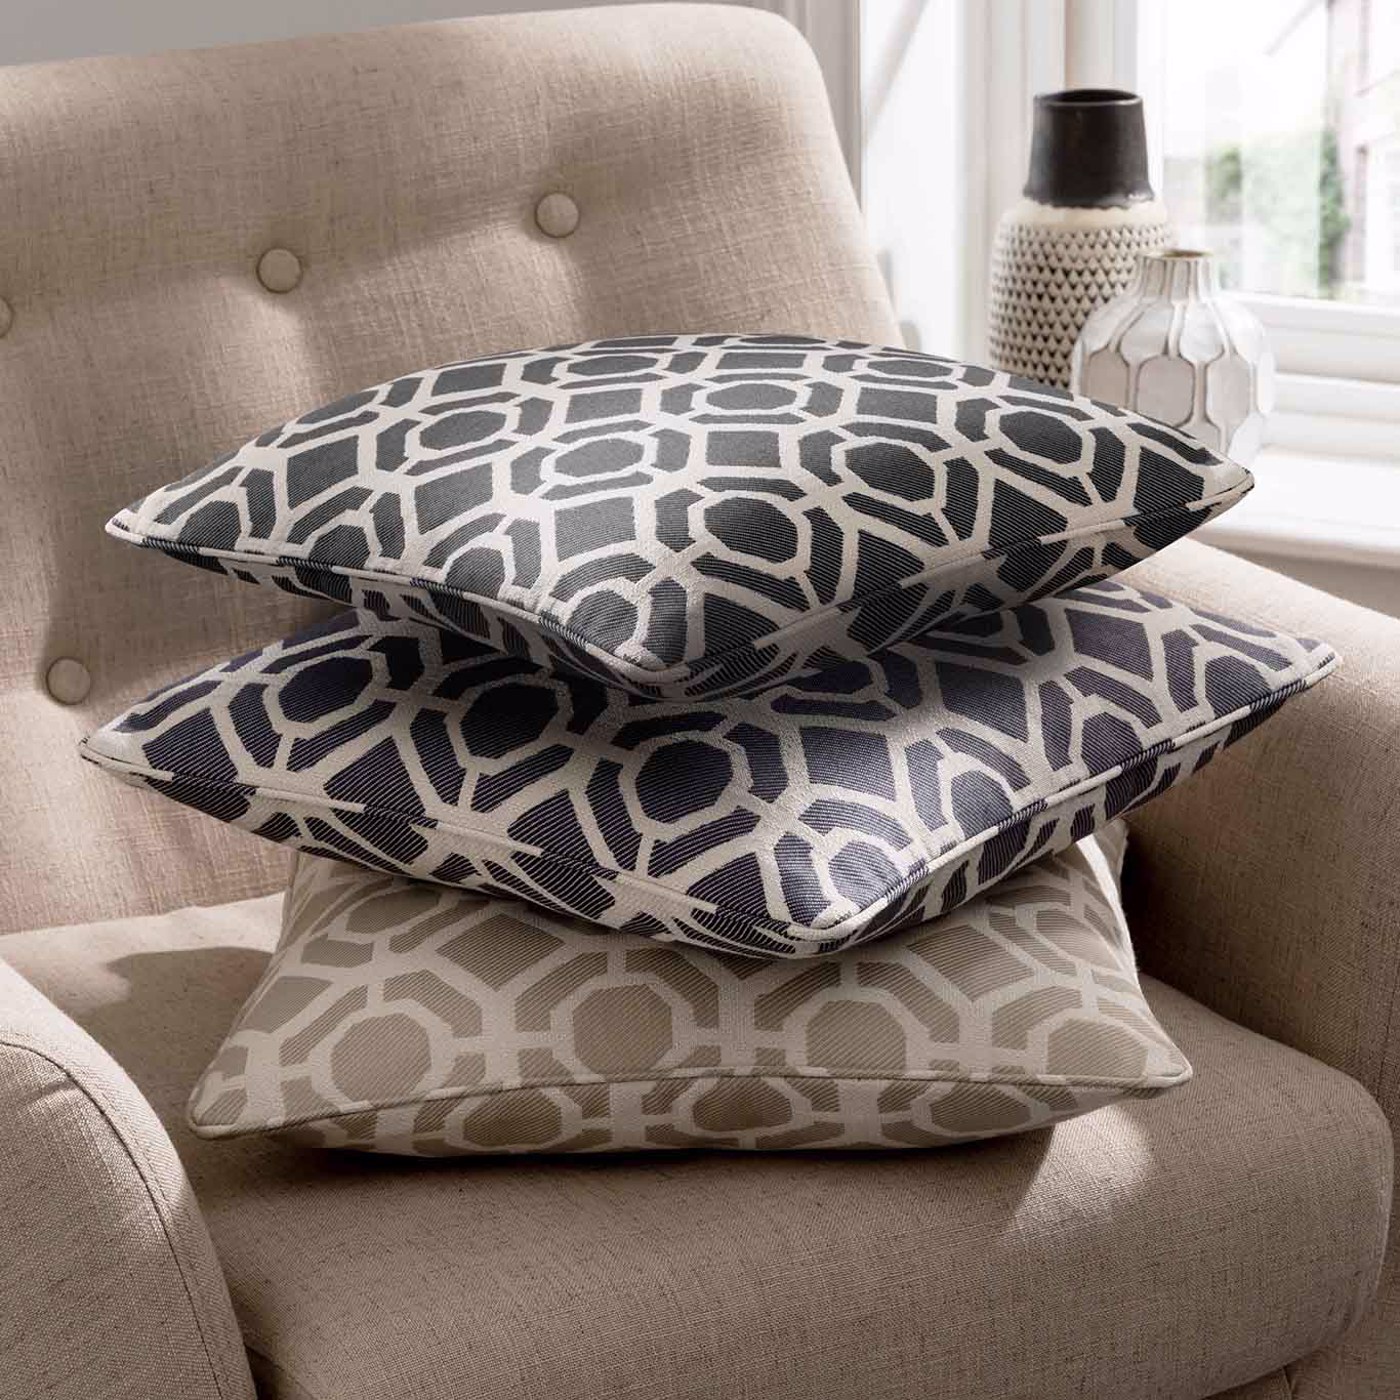 Castello Charcoal Cushions by STG